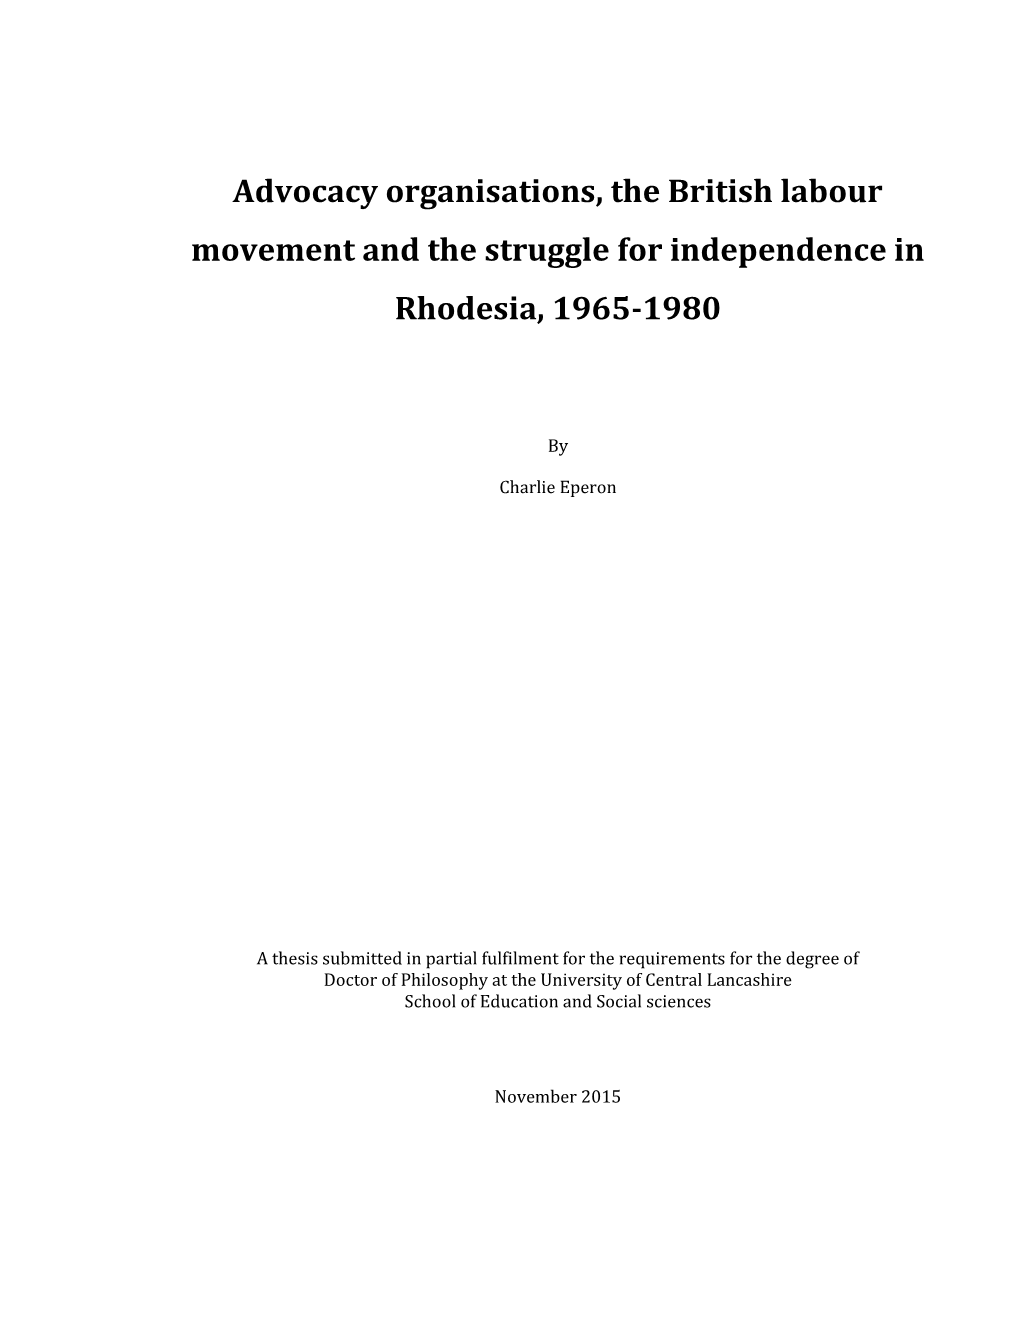 Advocacy Organisations, the British Labour Movement and the Struggle for Independence in Rhodesia, 1965-1980